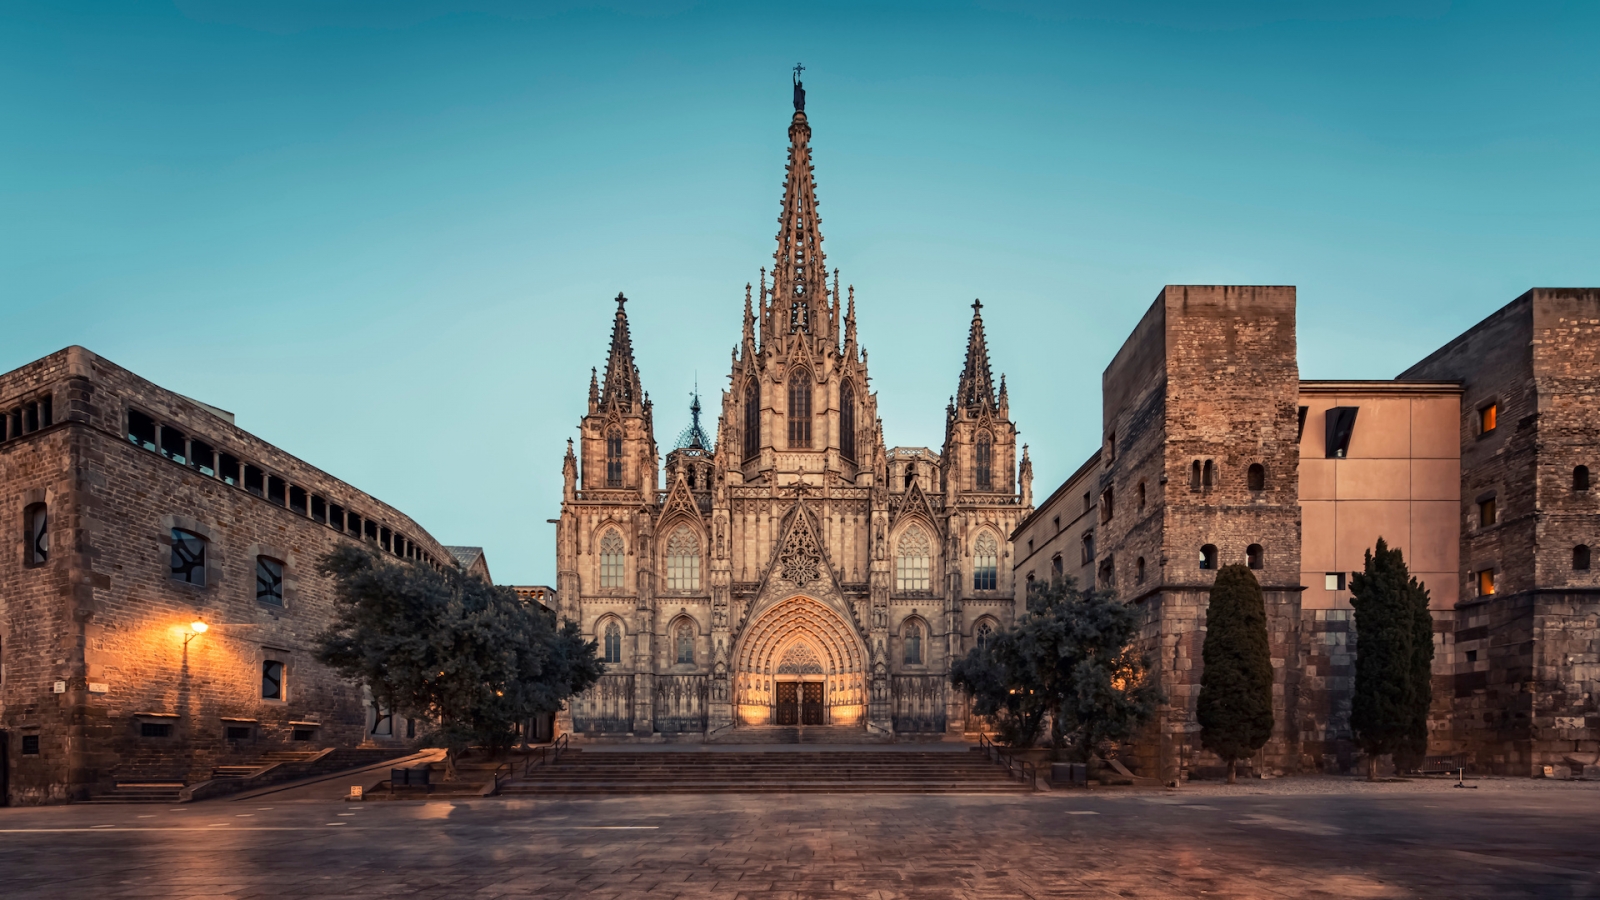 Barcelona Cathedral in the evening, Spain